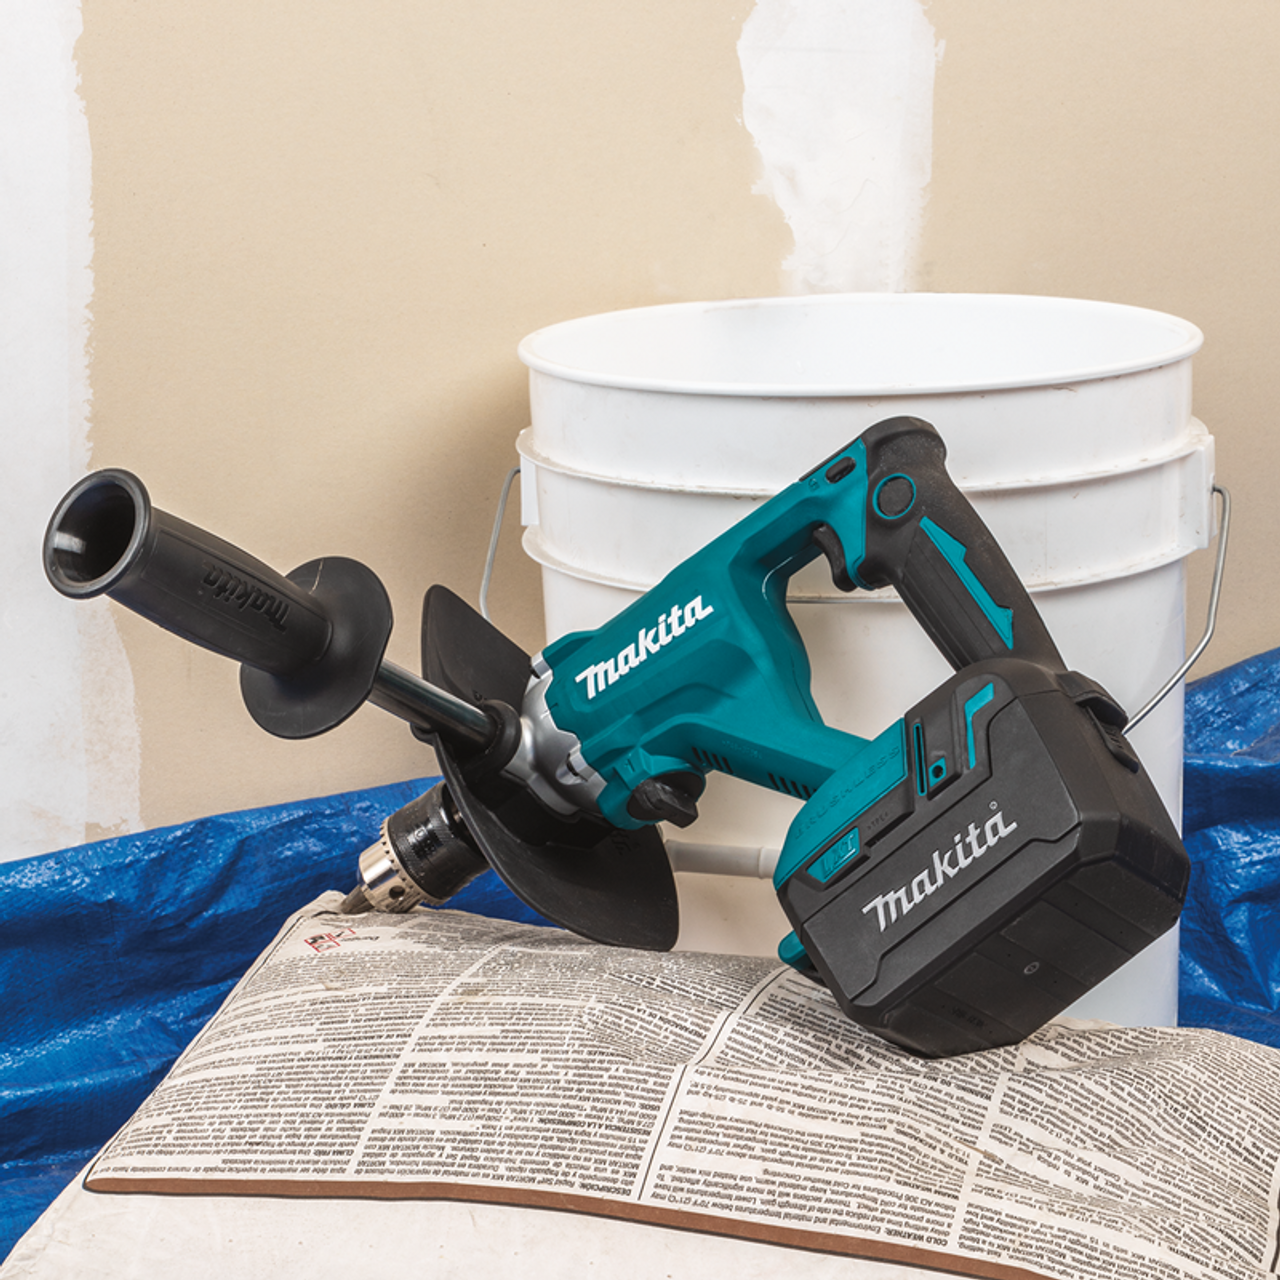 18V LXT? Lithium-Ion Brushless Cordless 1/2" Mixer, Tool Only, Variable speed trigger, XTU02Z